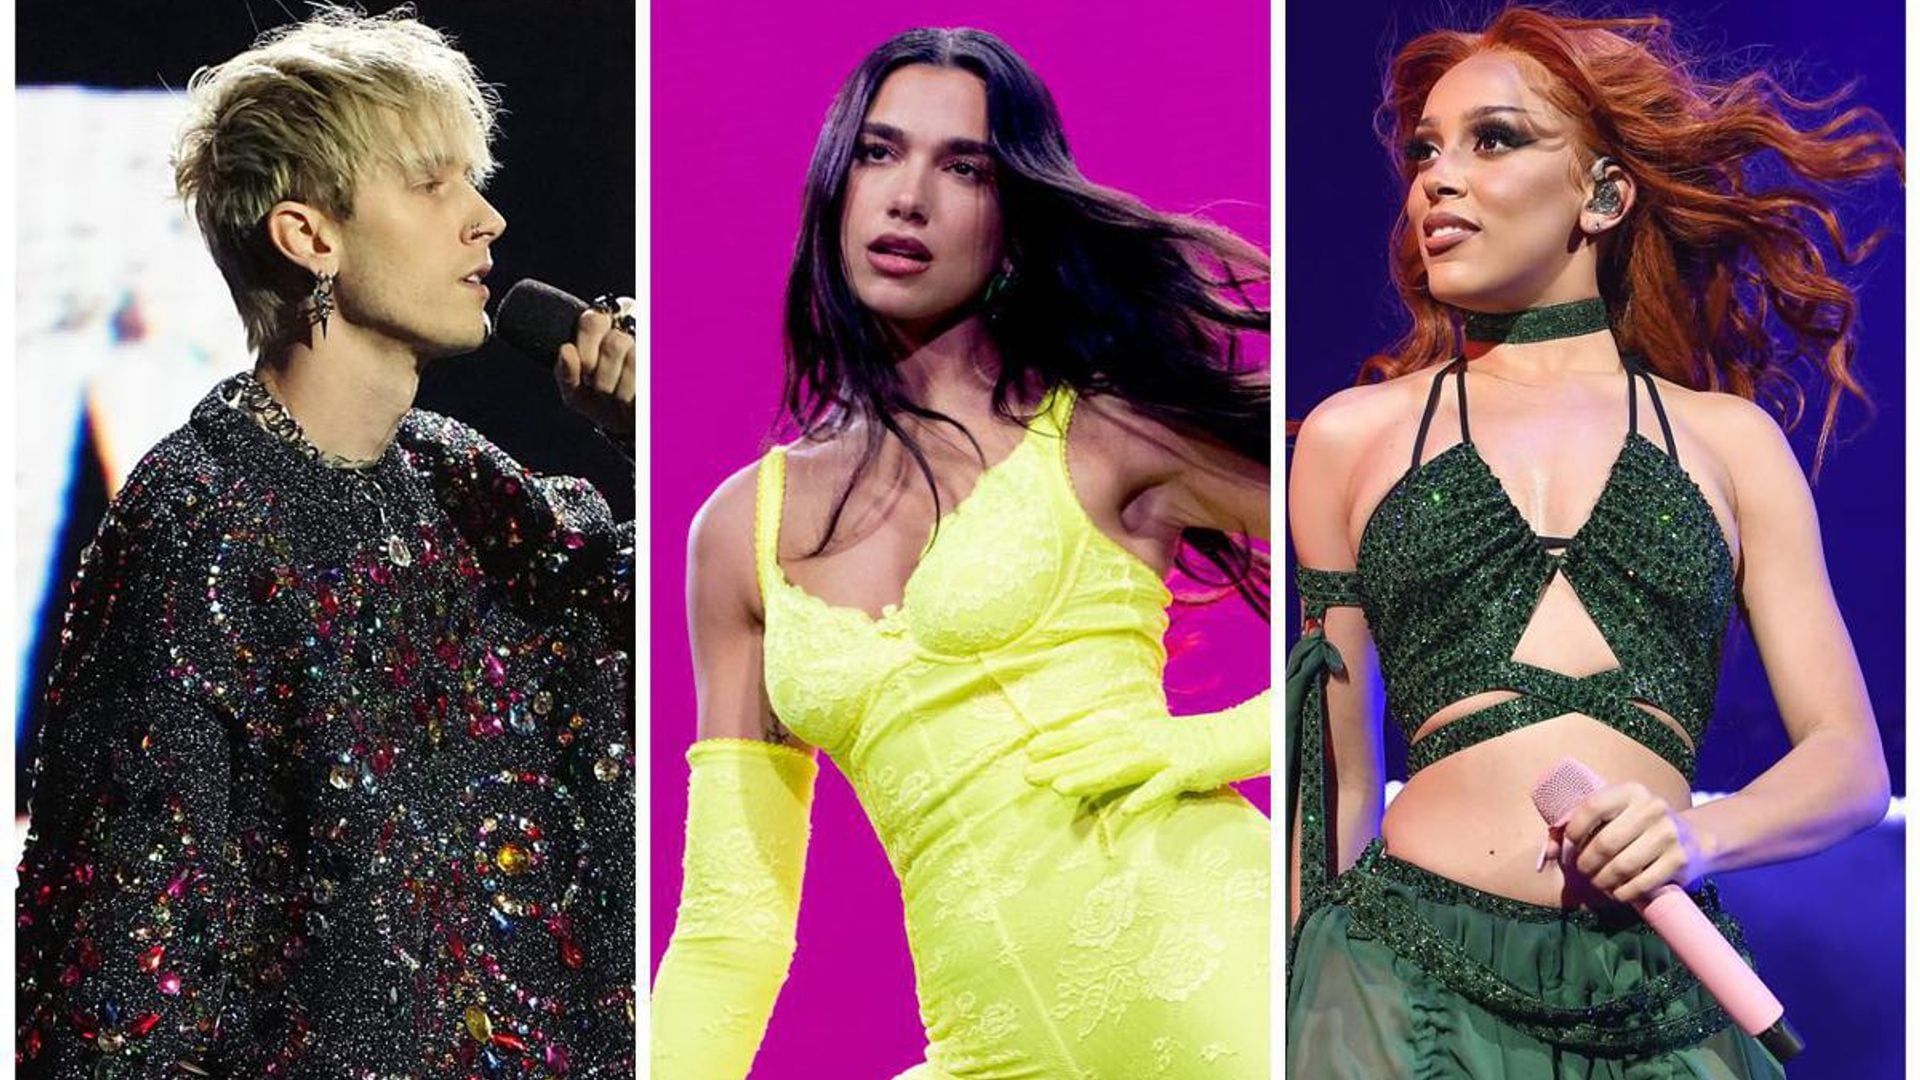 Are you ready for Lollapalooza 2022? Check out the full lineup, including Dua Lipa, Doja Cat and more